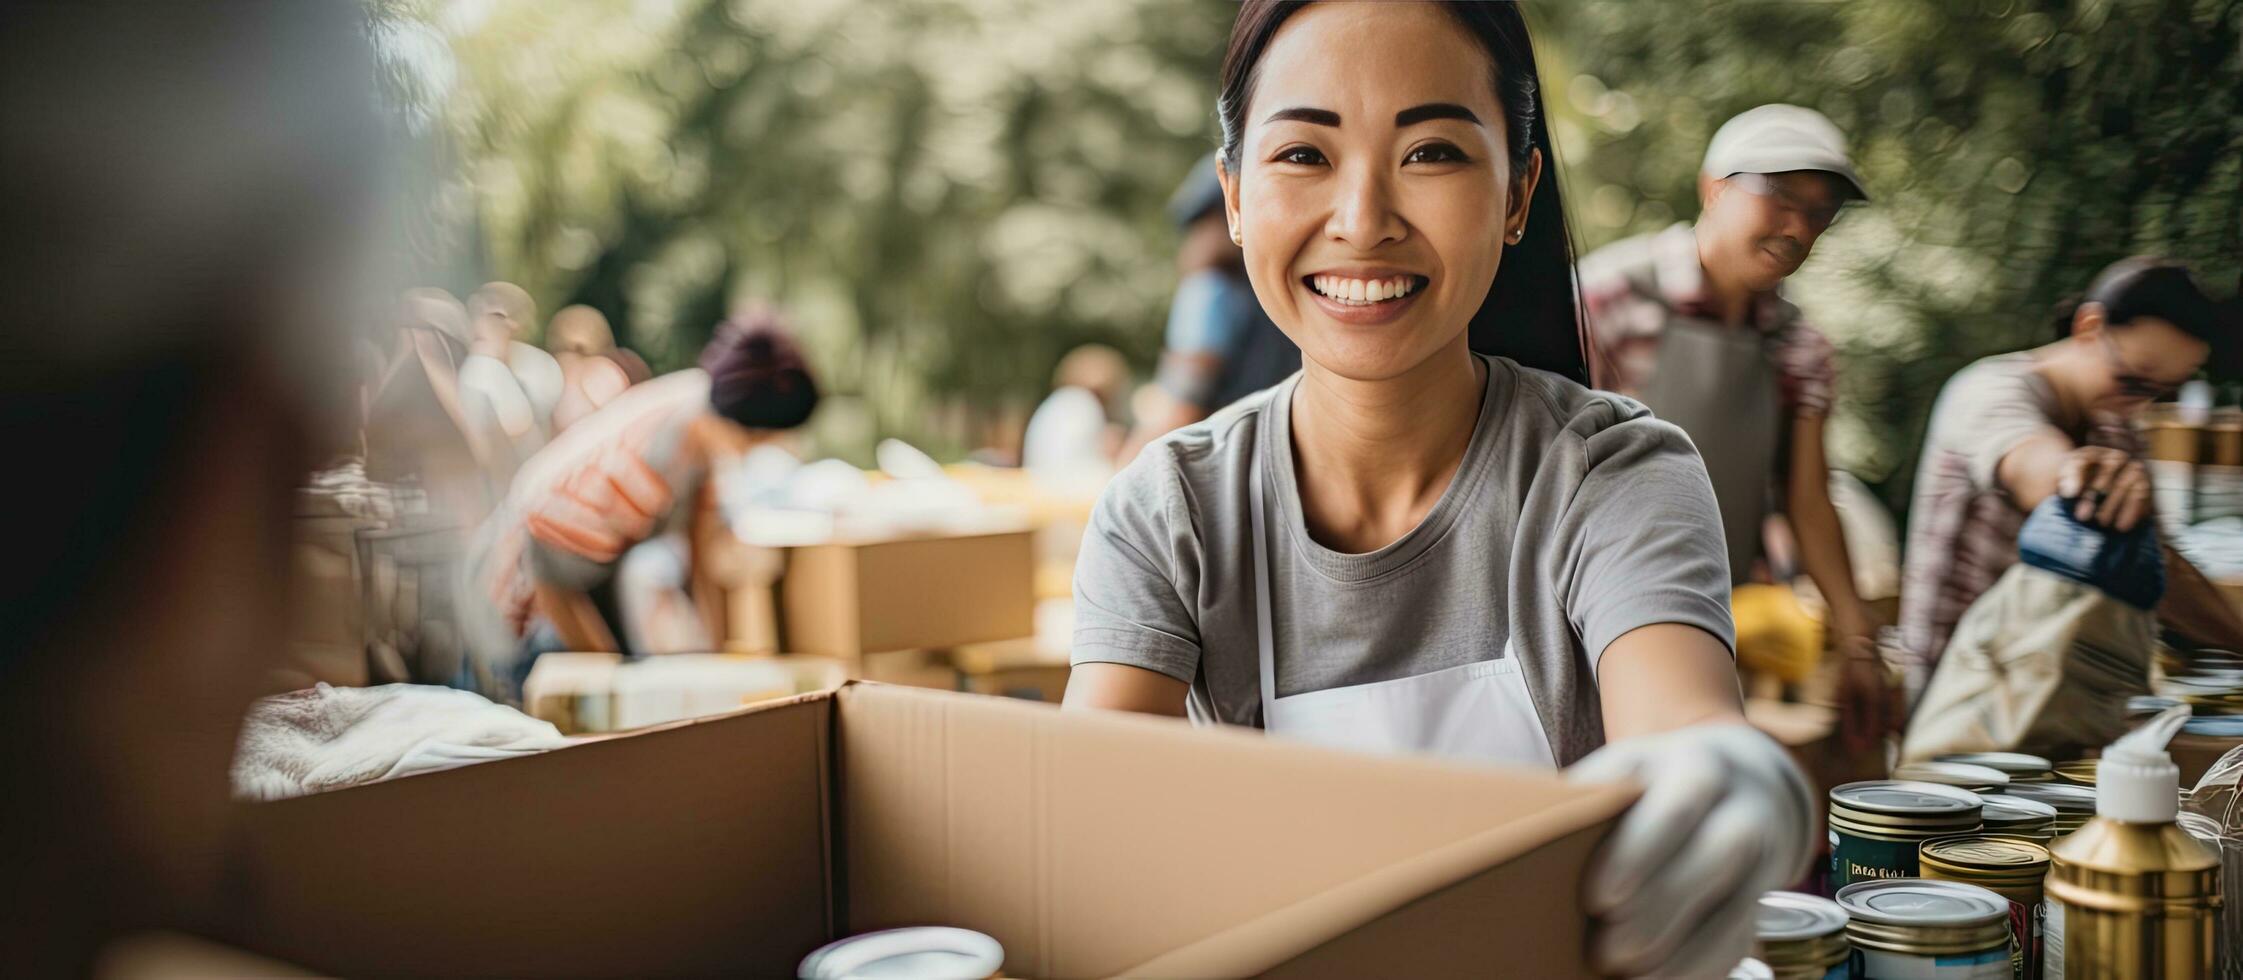 Asian woman volunteers at help event packs canned food in boxes smiles for portrait photo